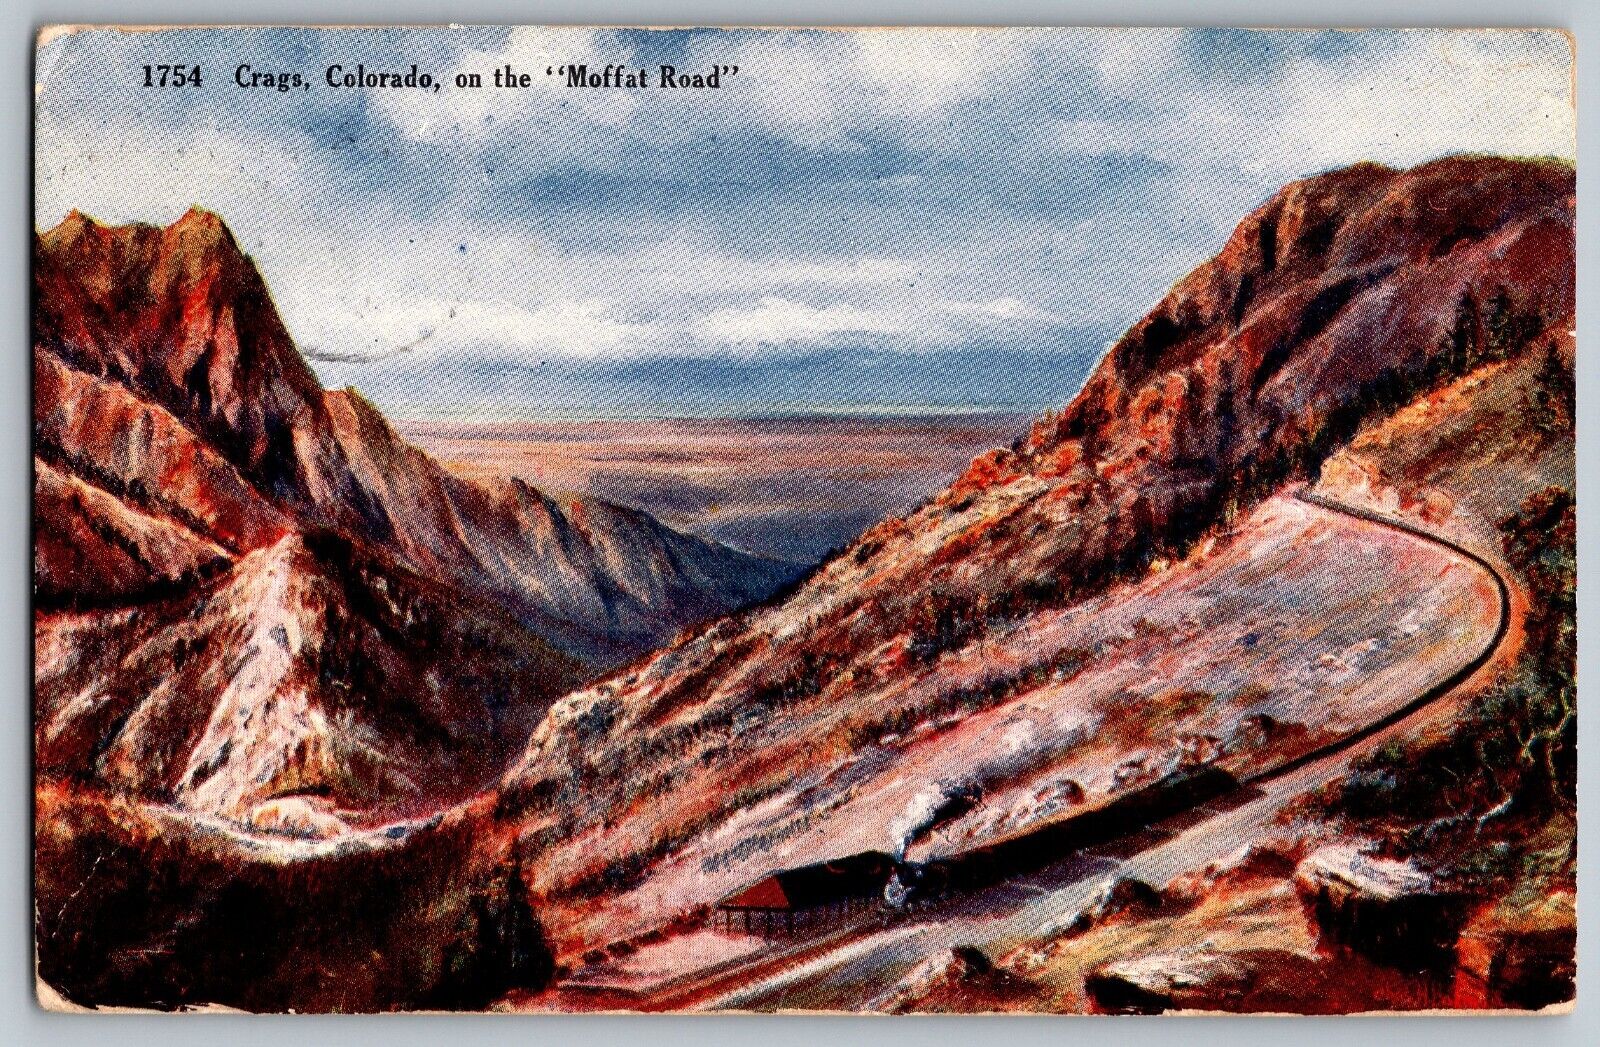 Crags, Colorado CO - On the Moffat Road - Vintage Postcard - Posted 1910